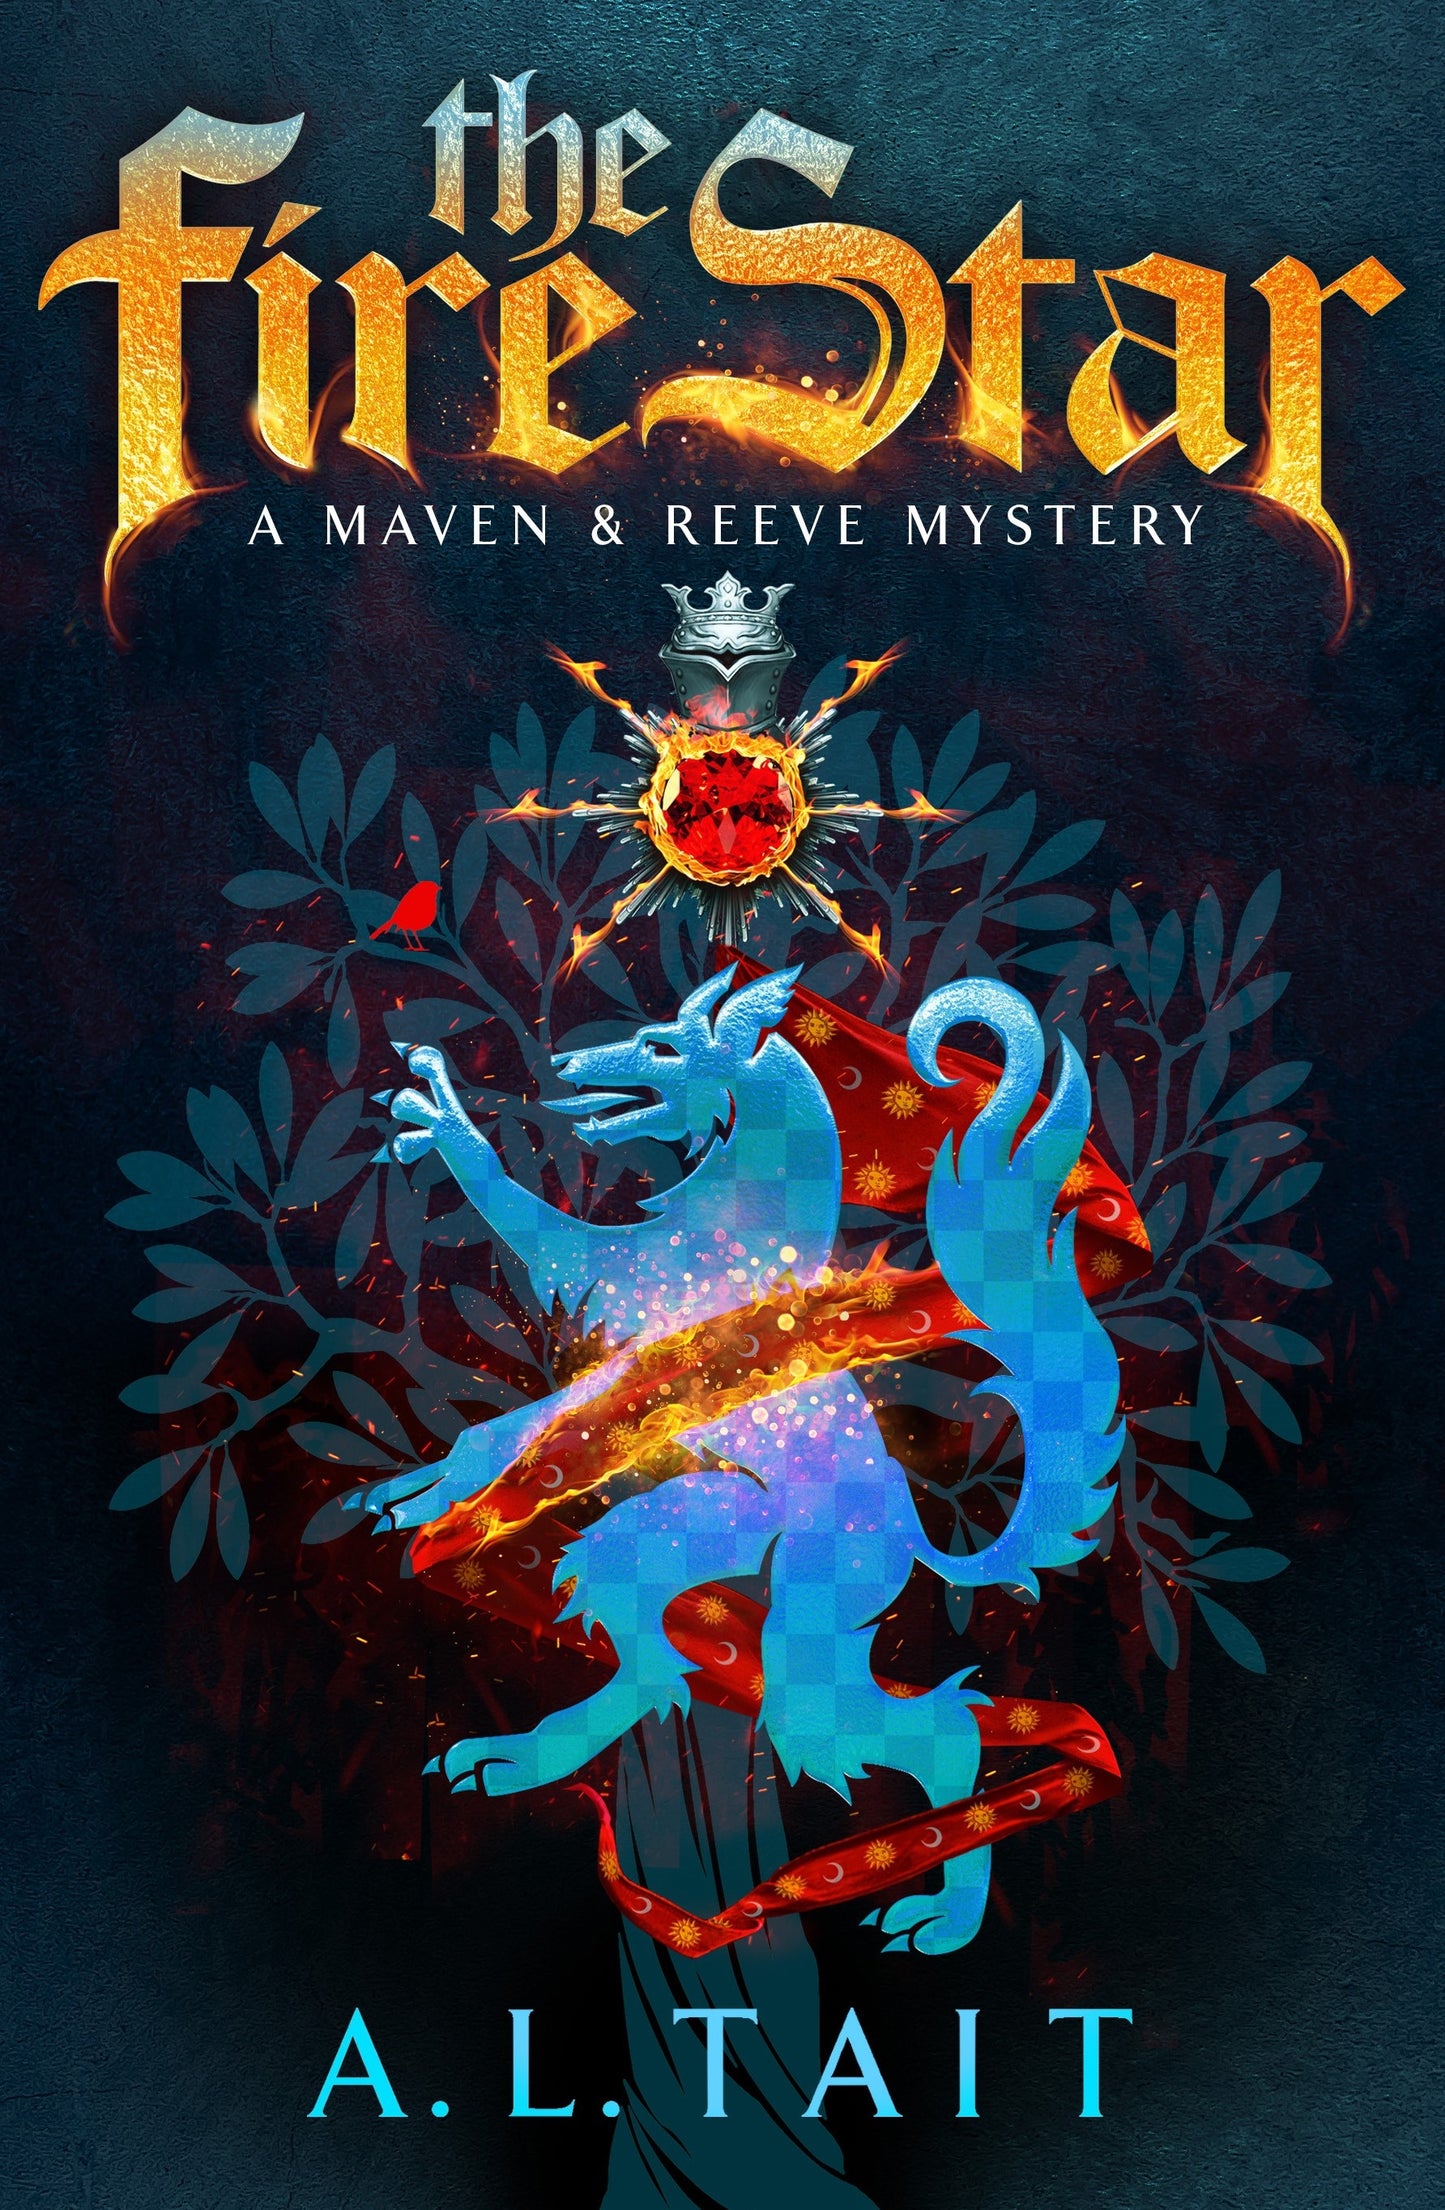 The Fire Star: A Maven and Reeve Mystery by A.L. Tait